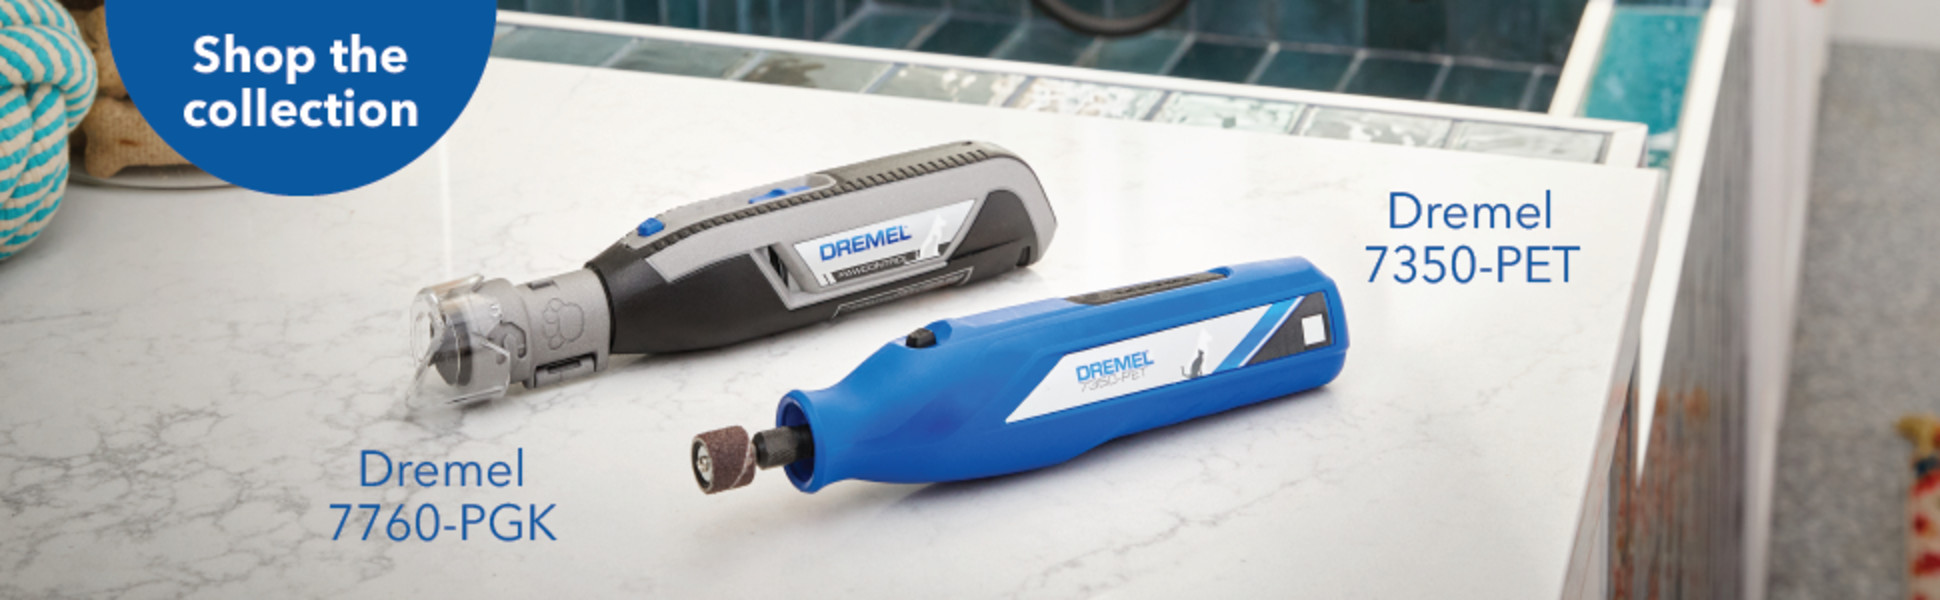 Dremel Electric Engraver Tool for Metal, Glass and Wood Corded